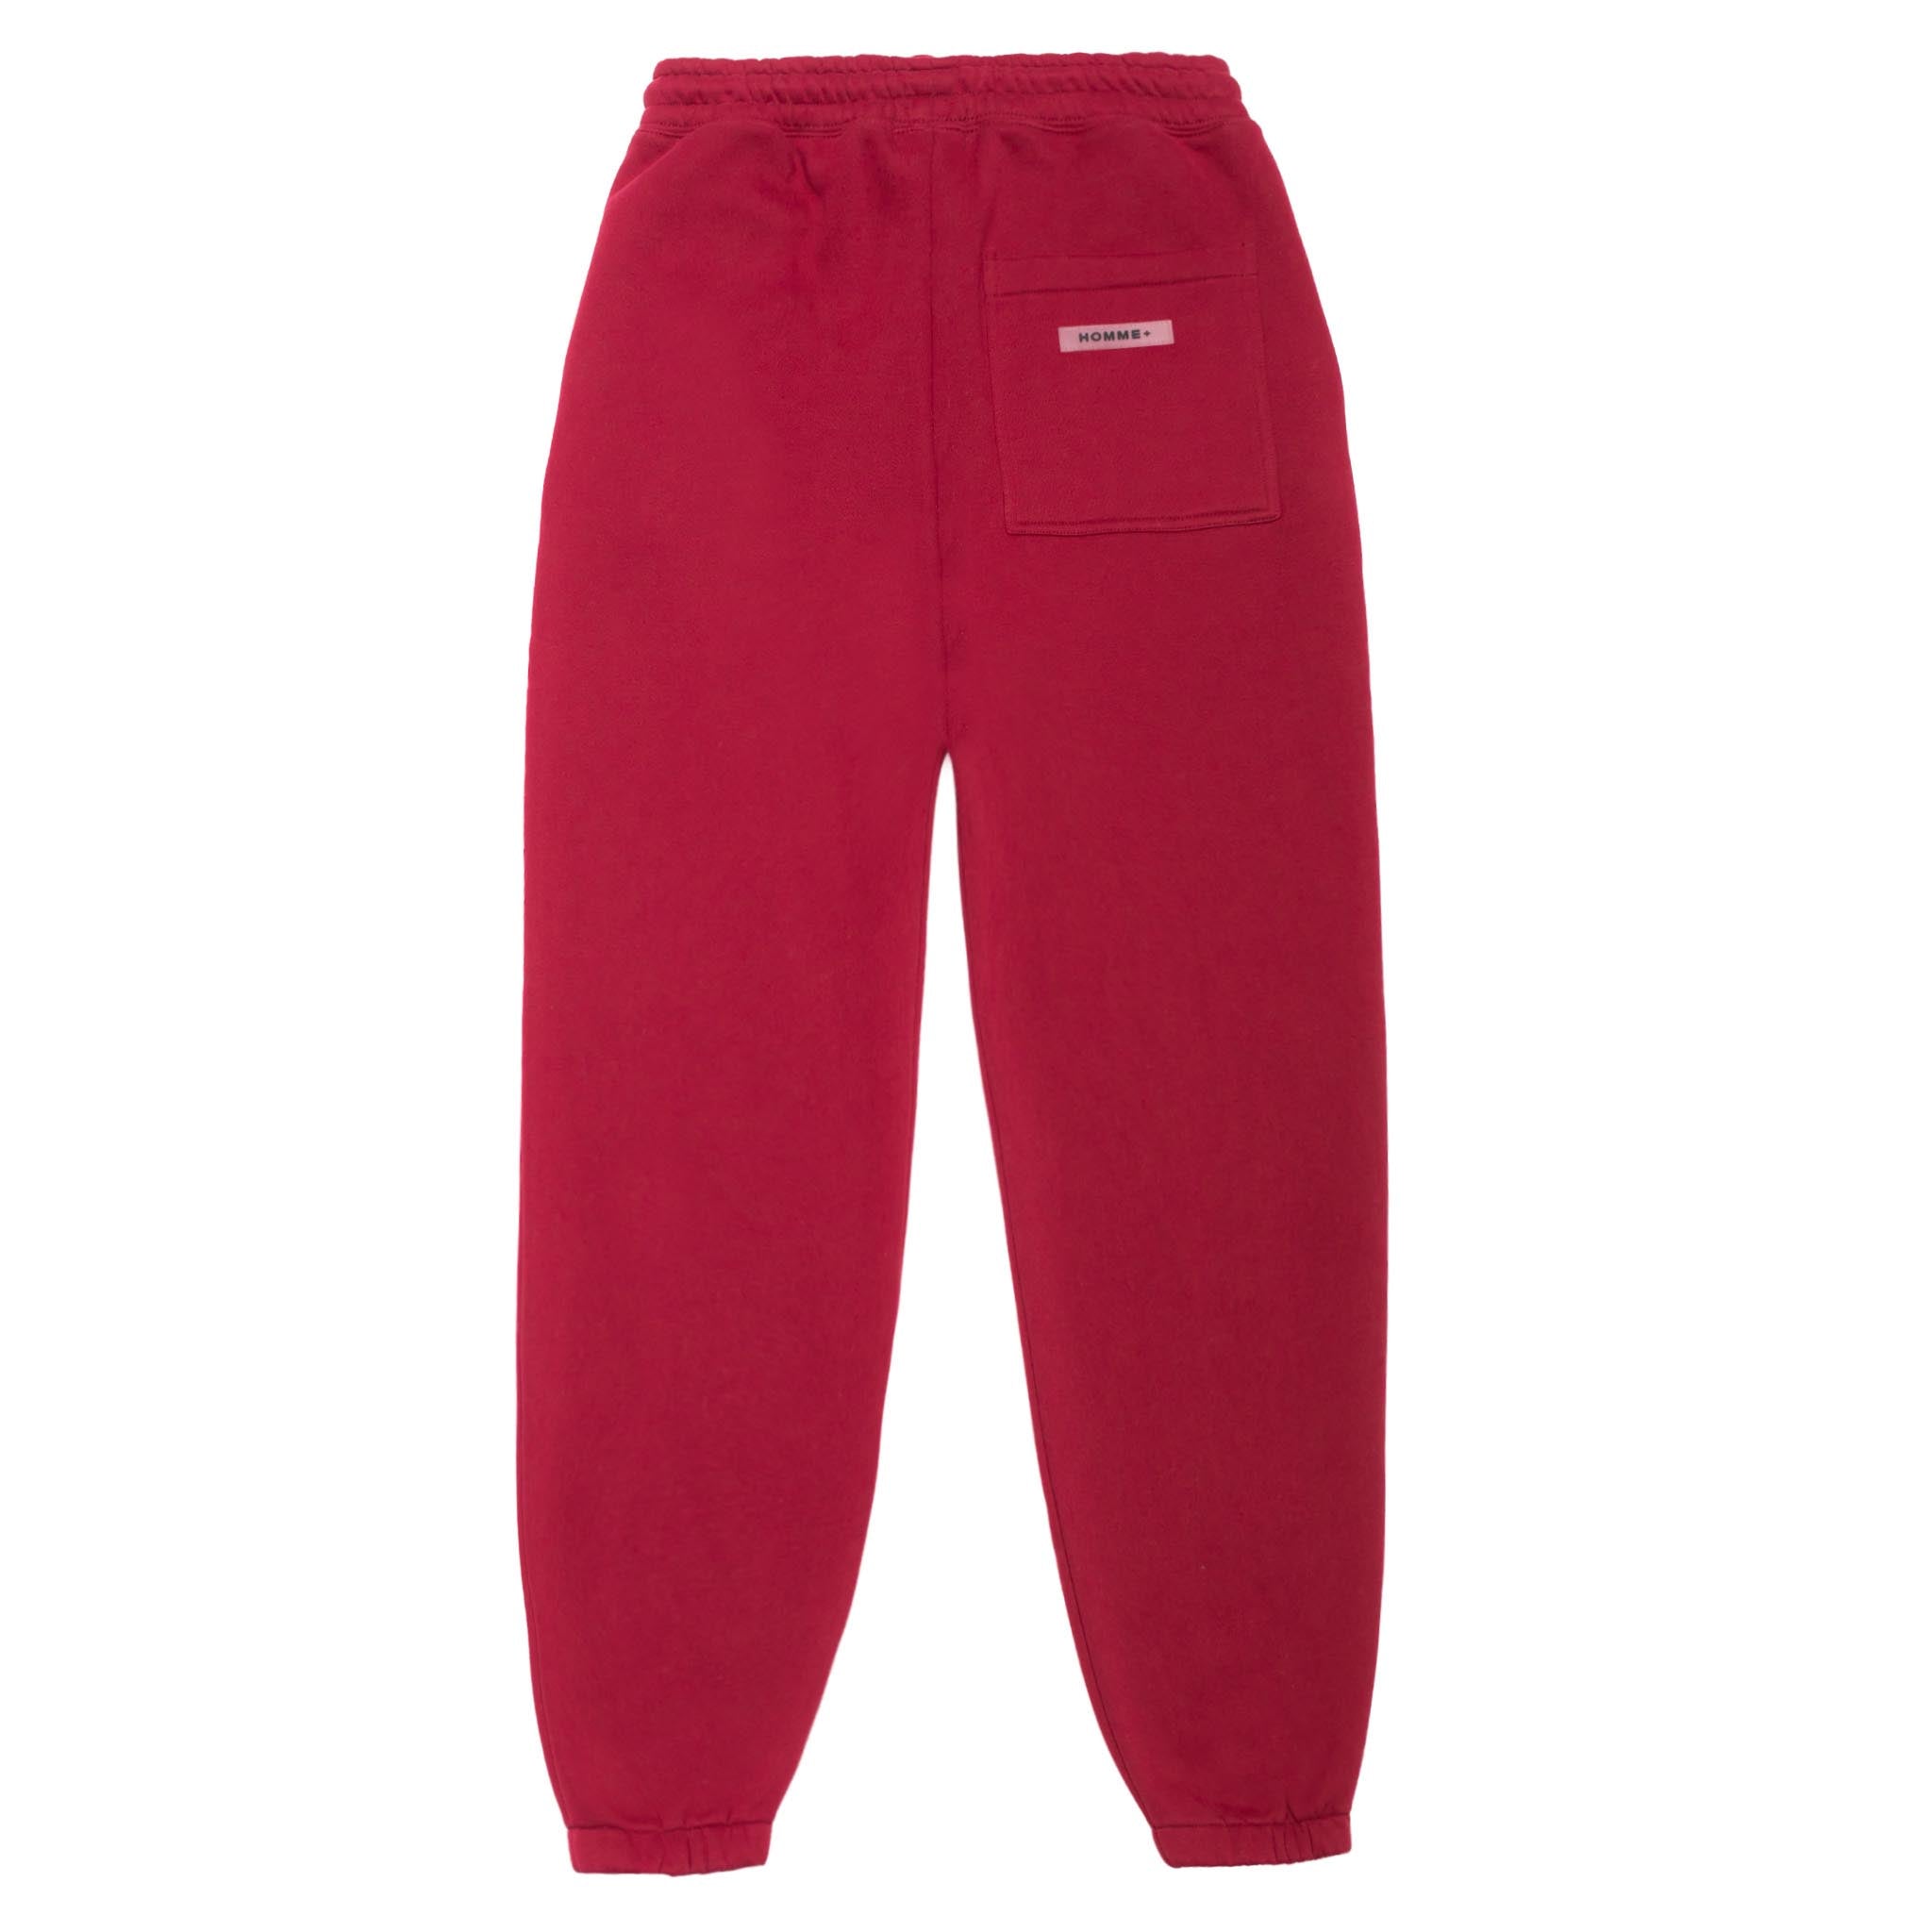 HOMME+ ESSENTIAL By Homme Jogger Burgundy